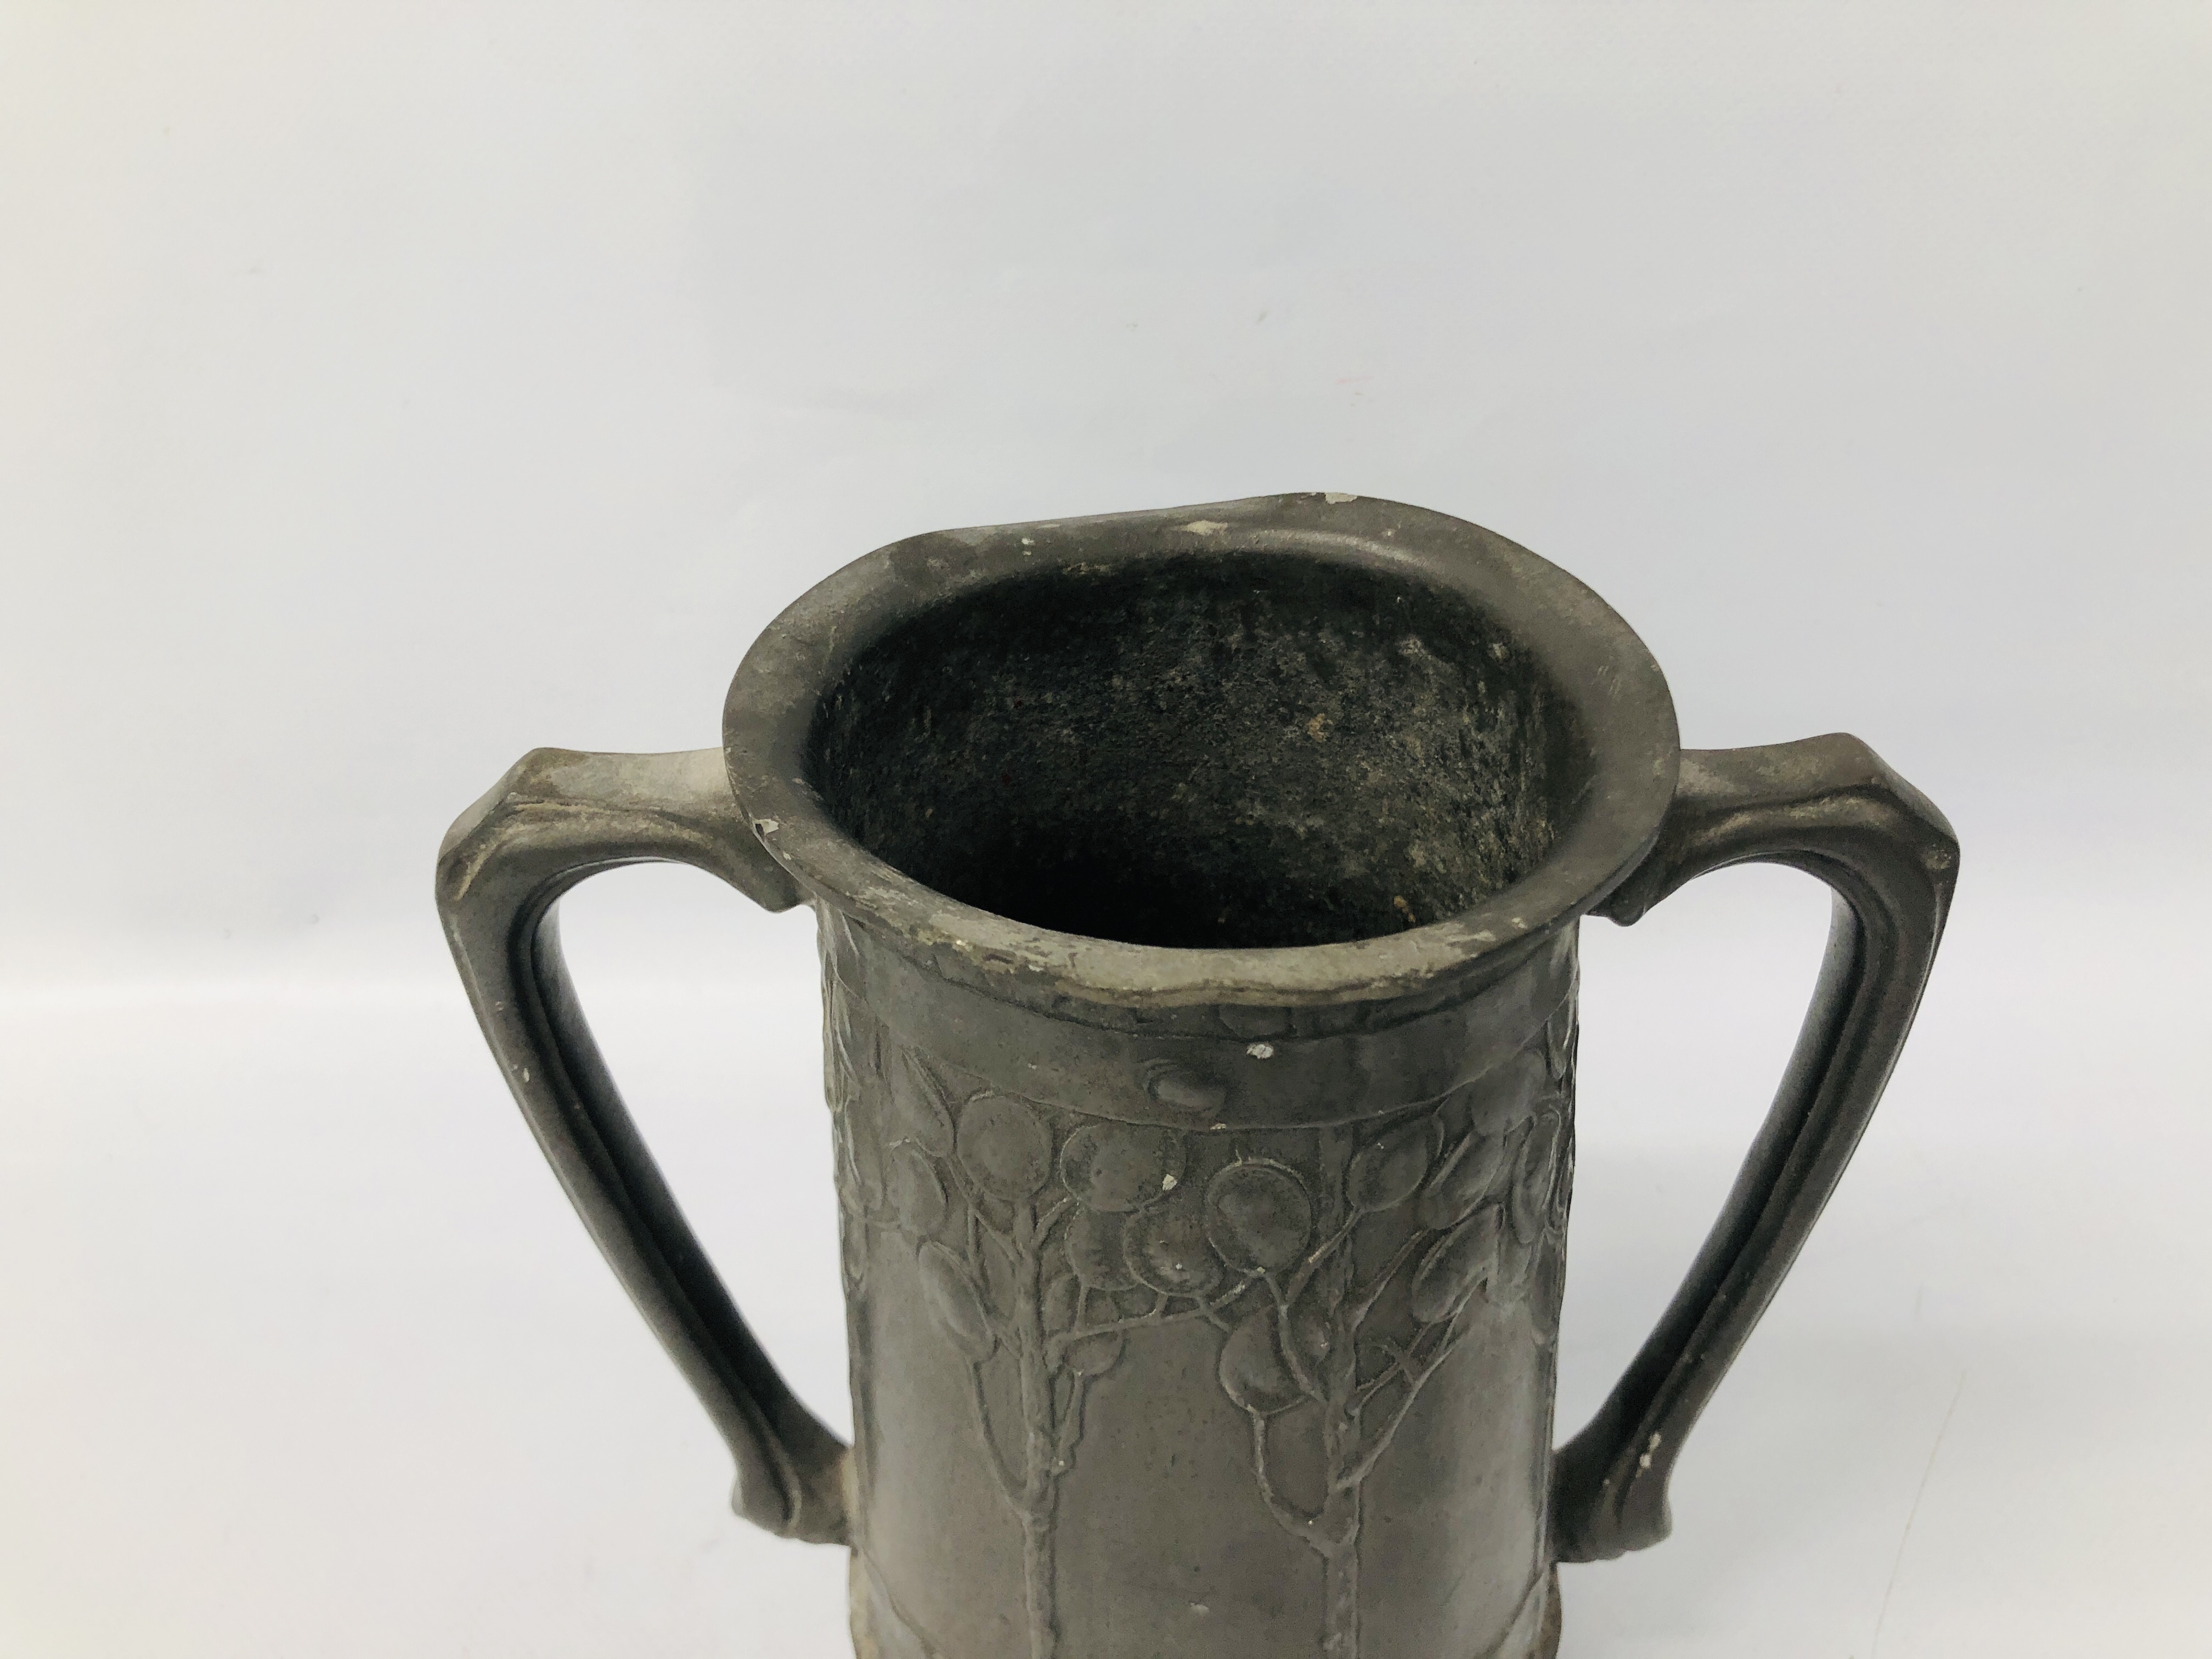 VINTAGE ARTS AND CRAFTS TUDRIC PEWTER TWO HANDLED TANKARD / VASE BEARING MAKERS MARK "LIBERTY & CO" - Image 2 of 10